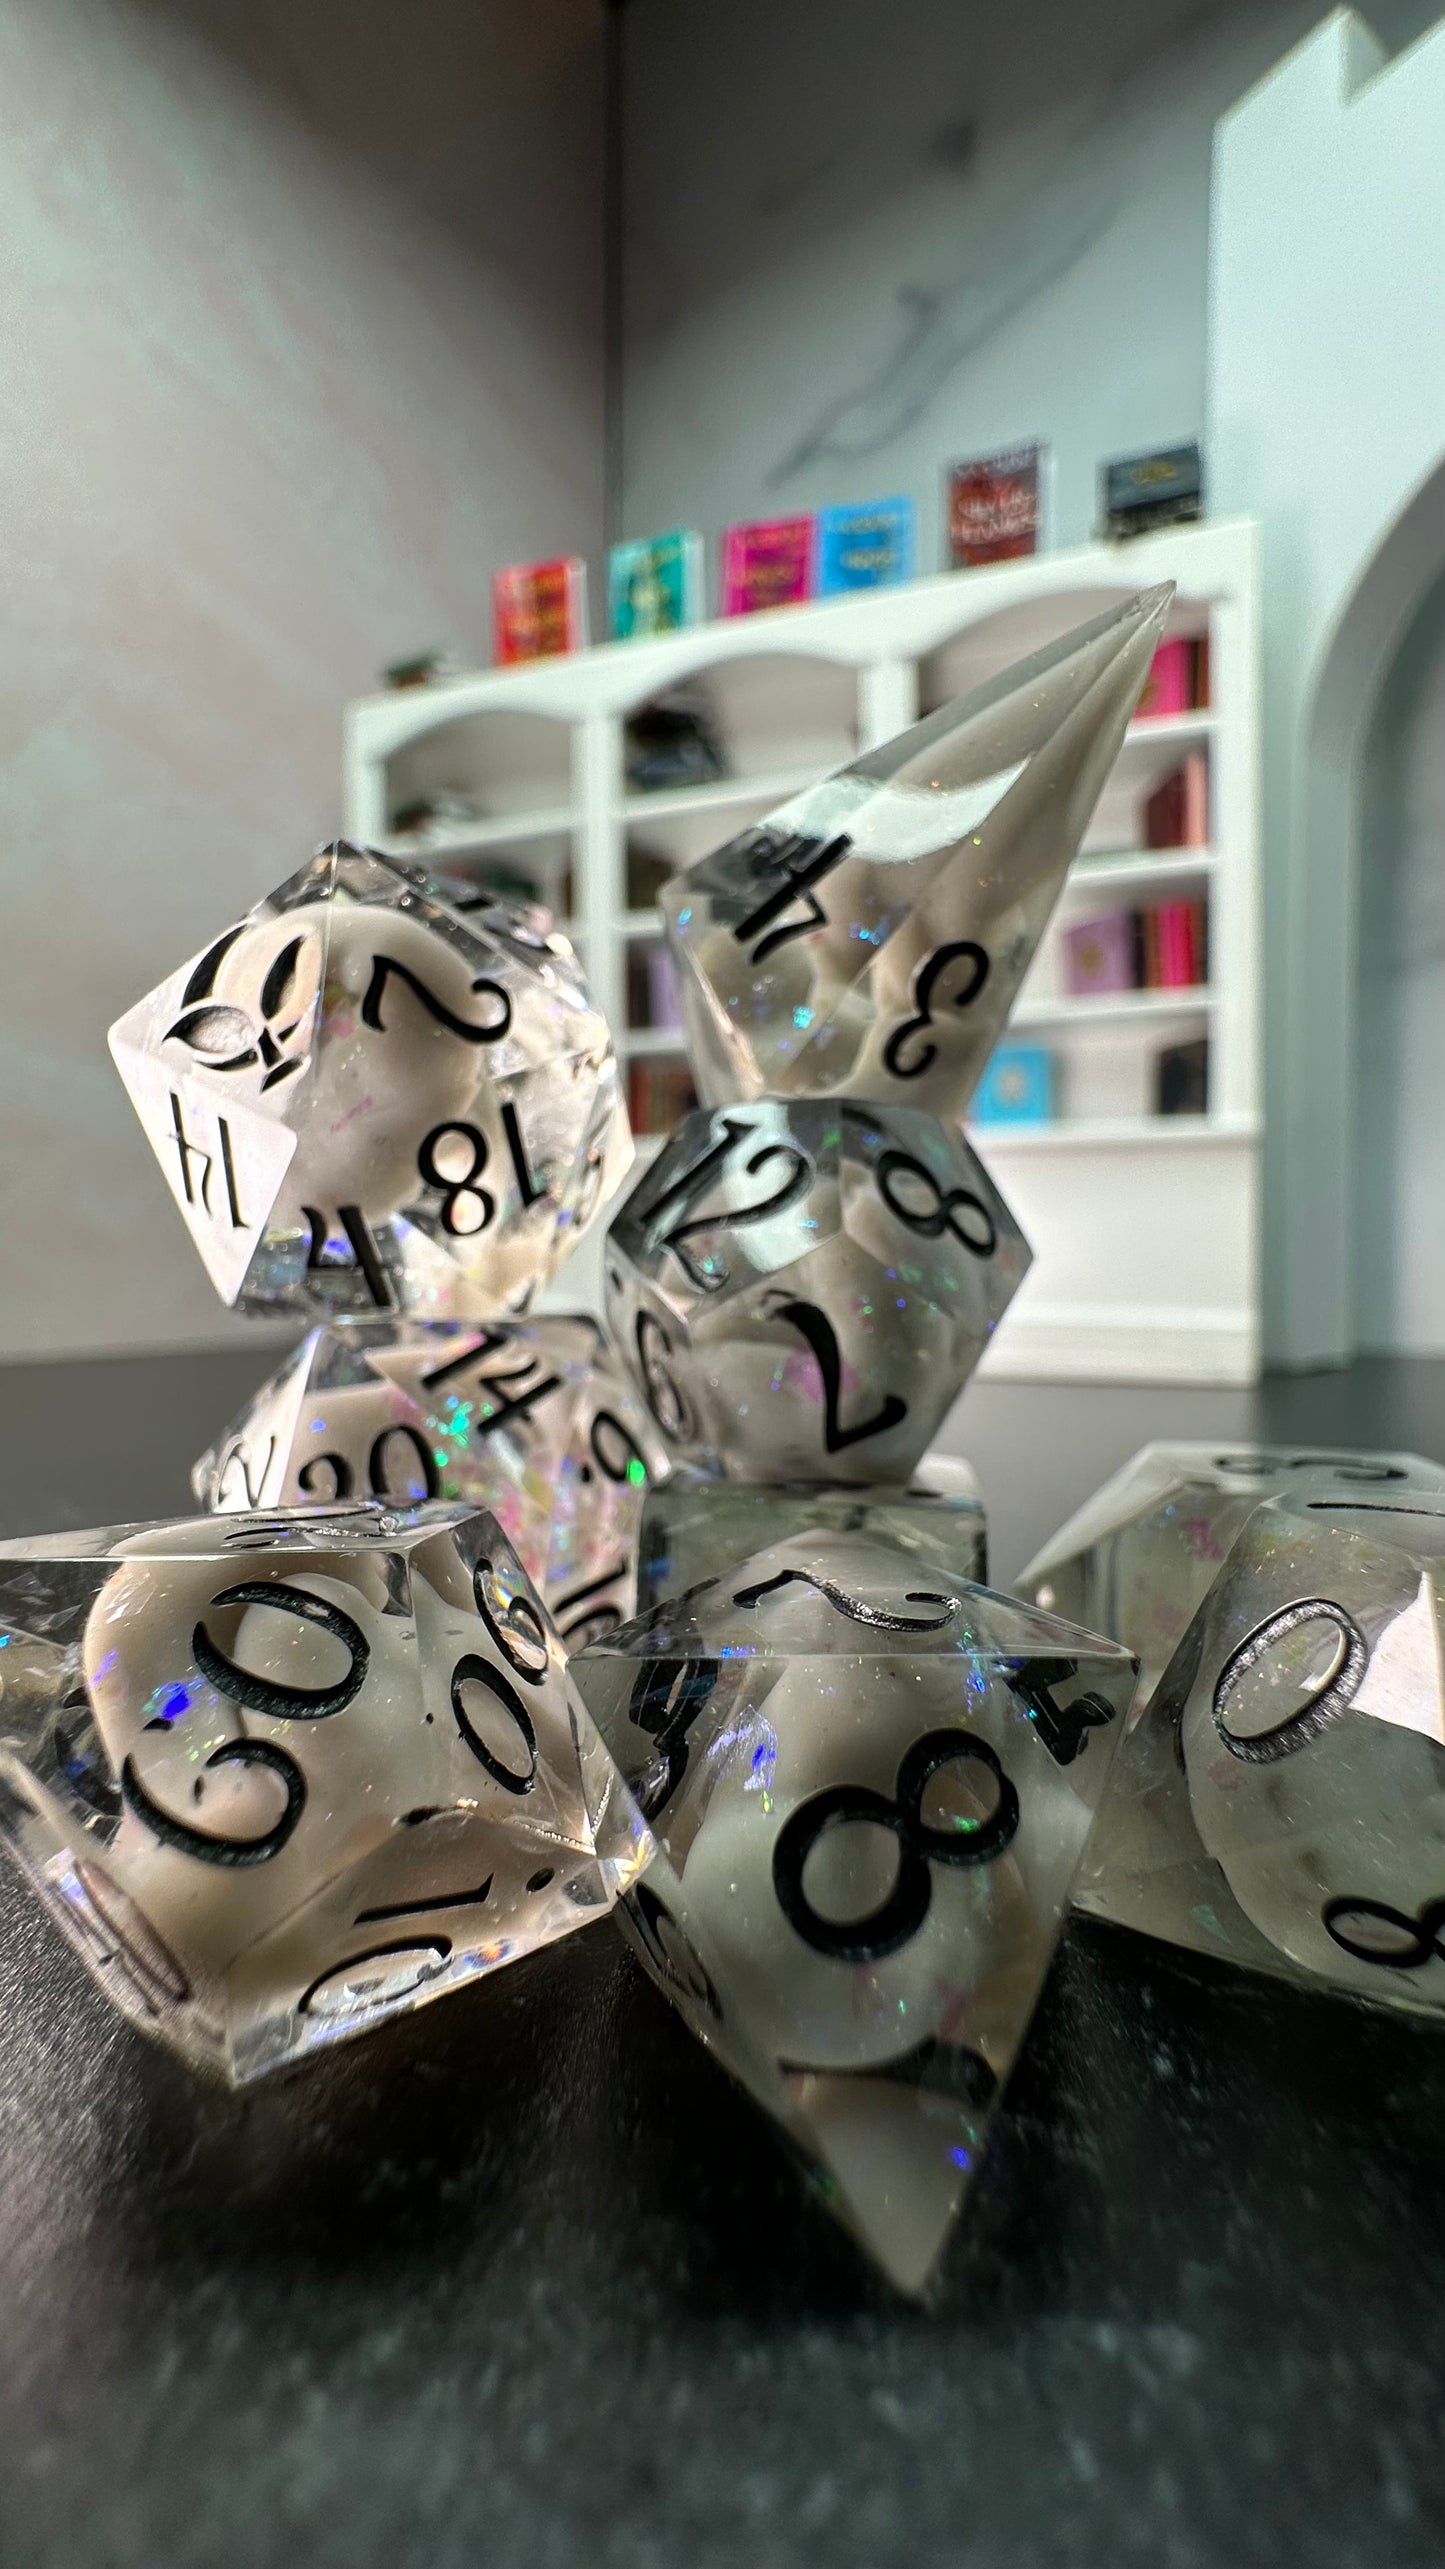 King of Hybern- 8 piece polyhedral dice set